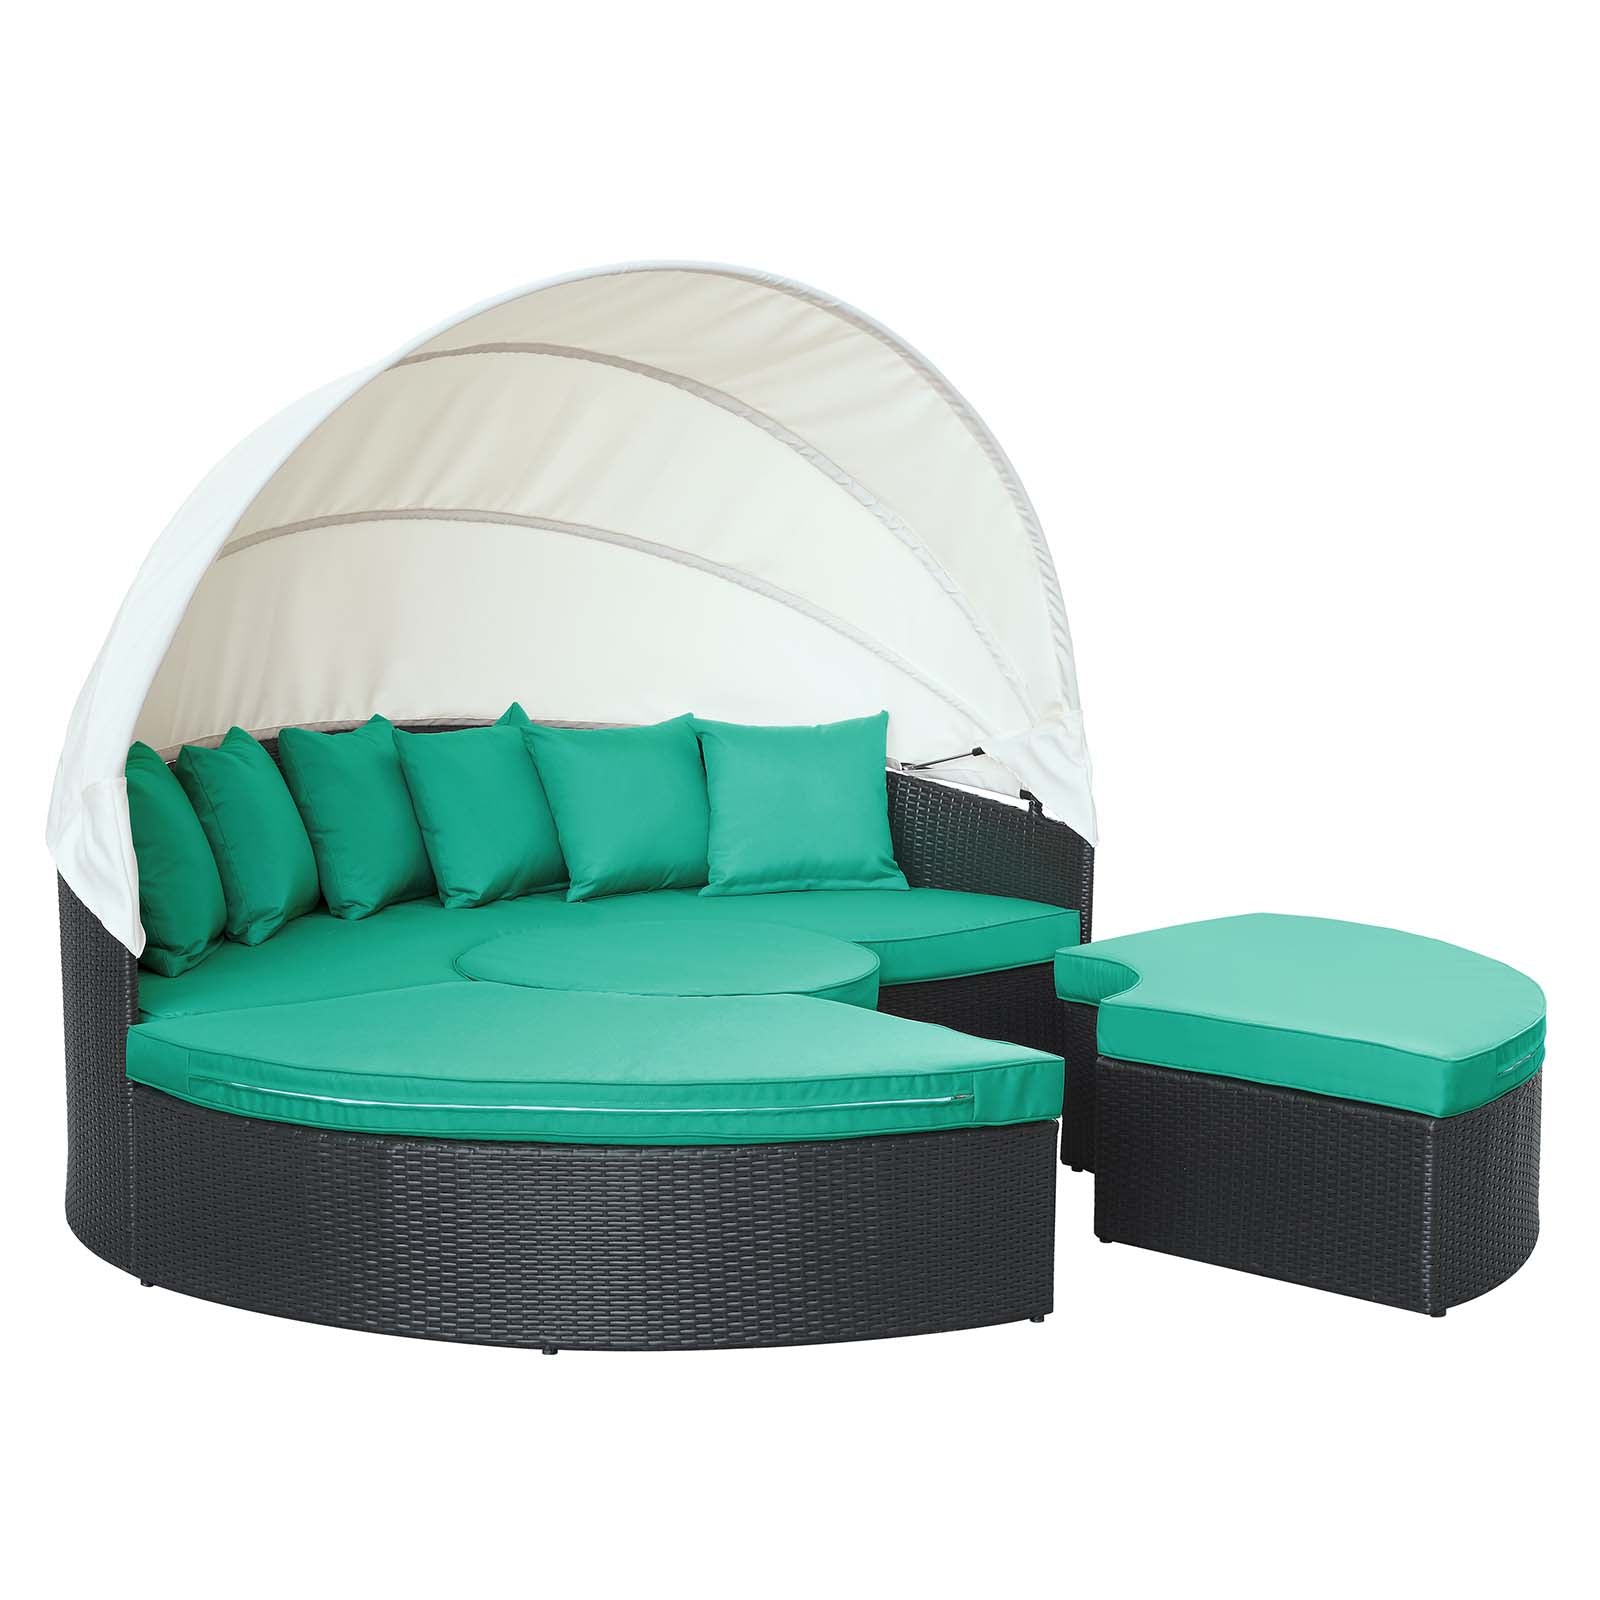 Modway Patio Daybeds - Quest Canopy Outdoor Patio Daybed Espresso Turquoise